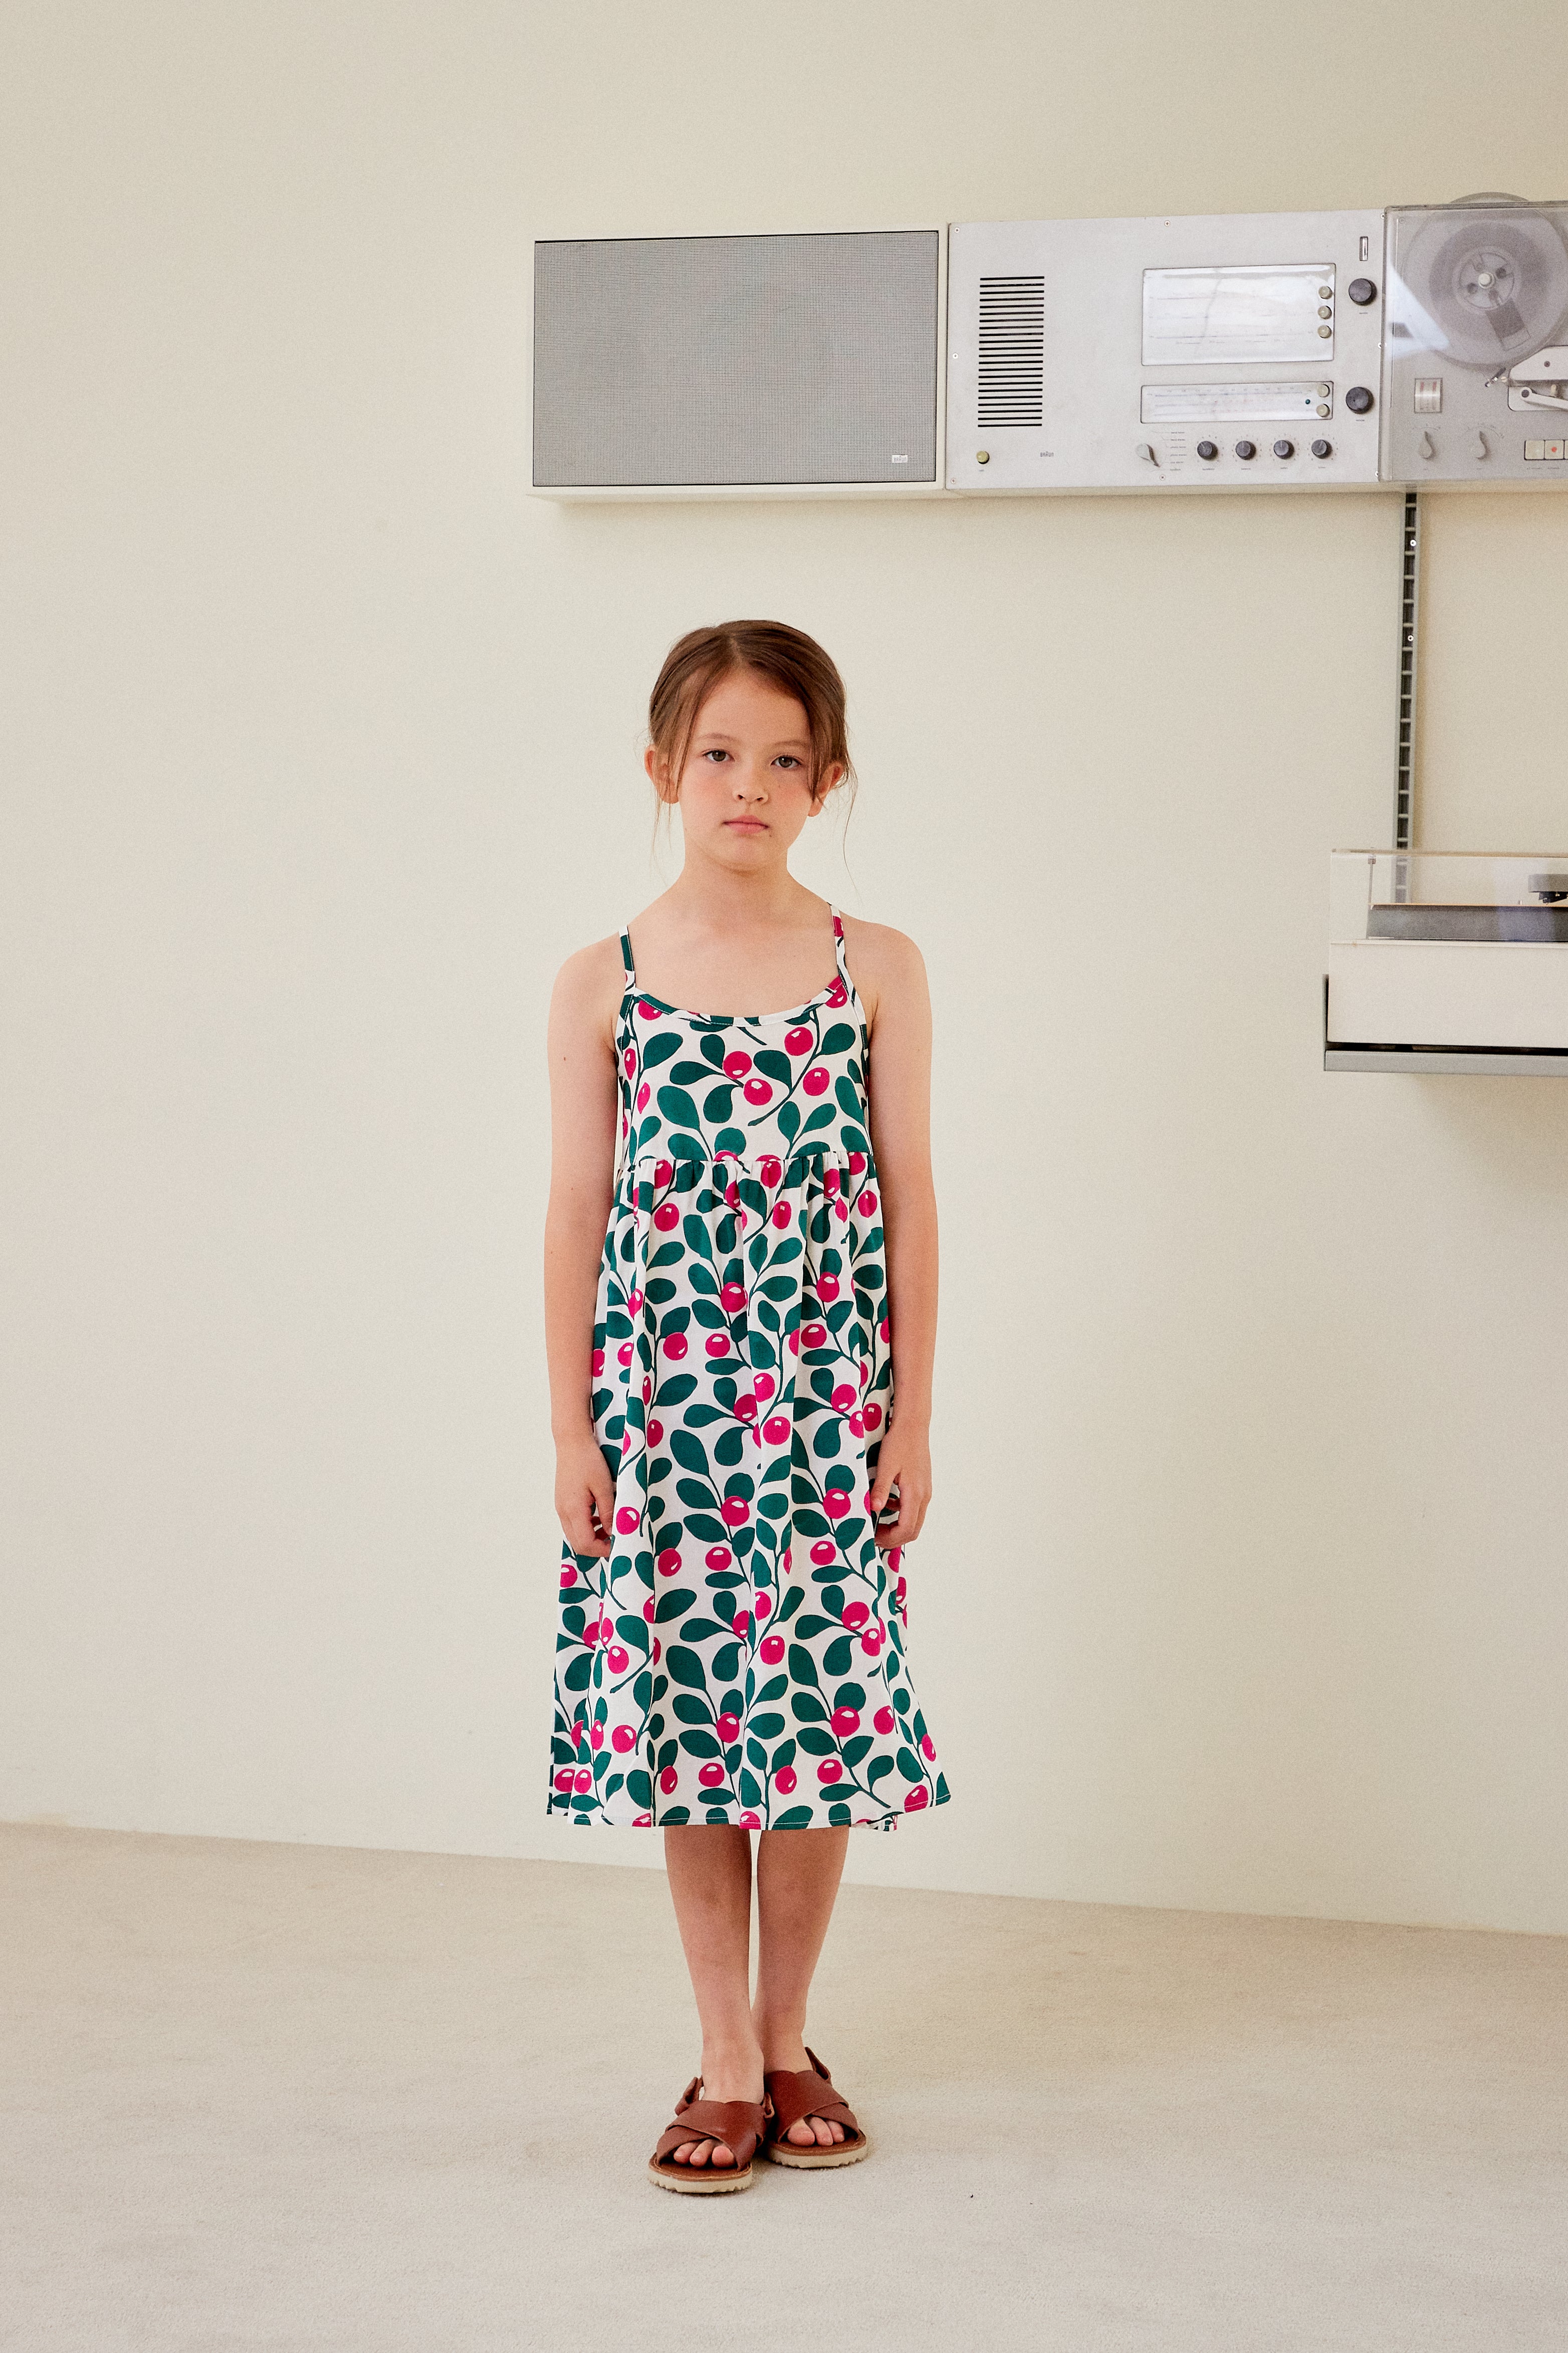 Back to school clothes! (what my girls are wearing) - The Sunny Side Up Blog